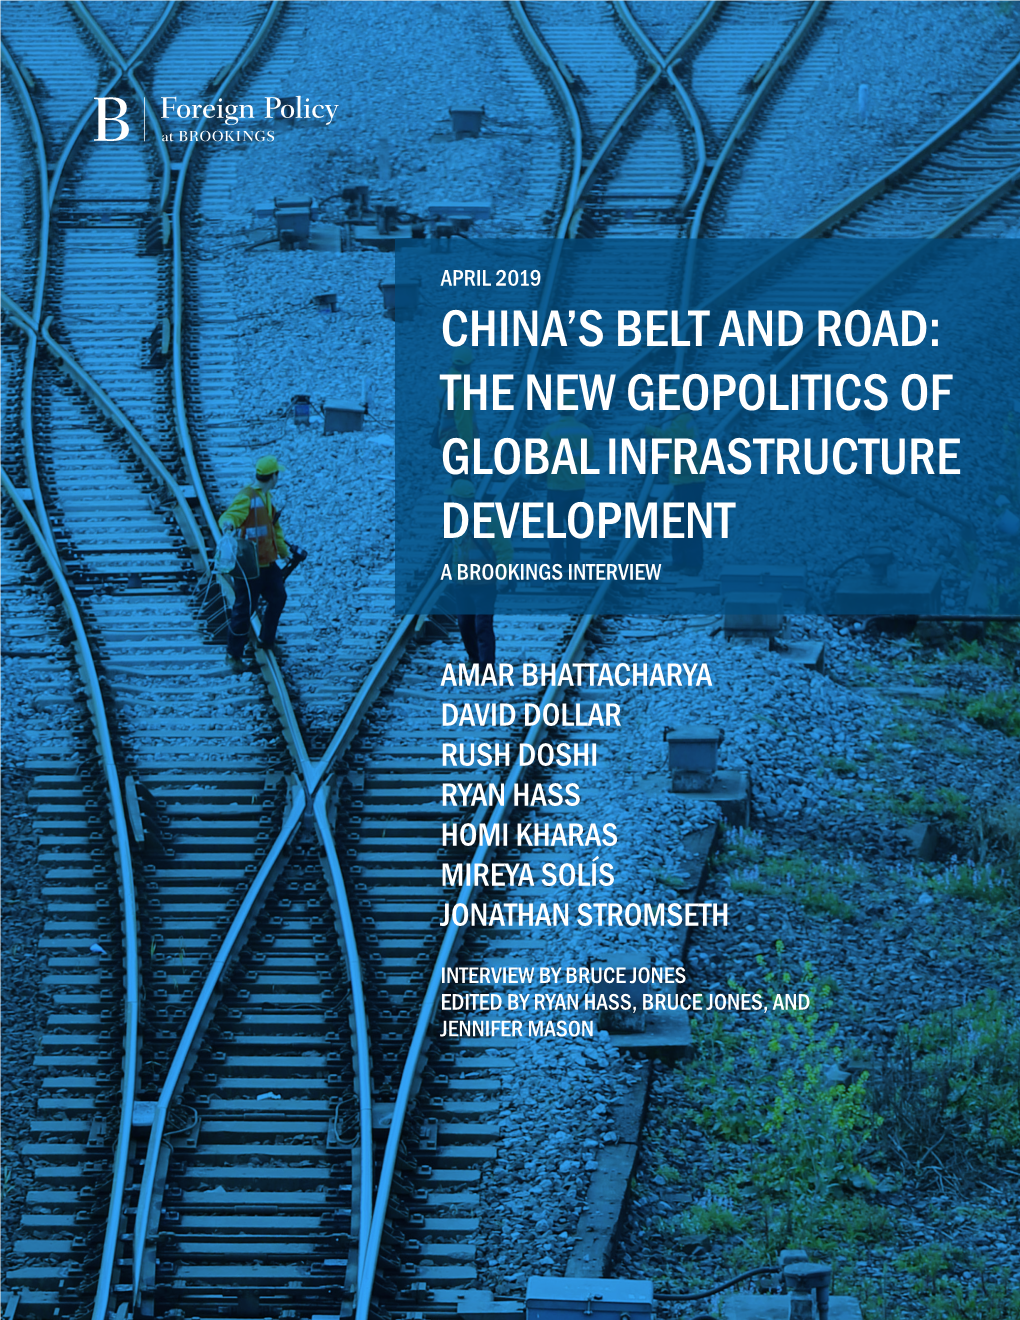 China's Belt and Road: the New Geopolitics of Global Infrastructure